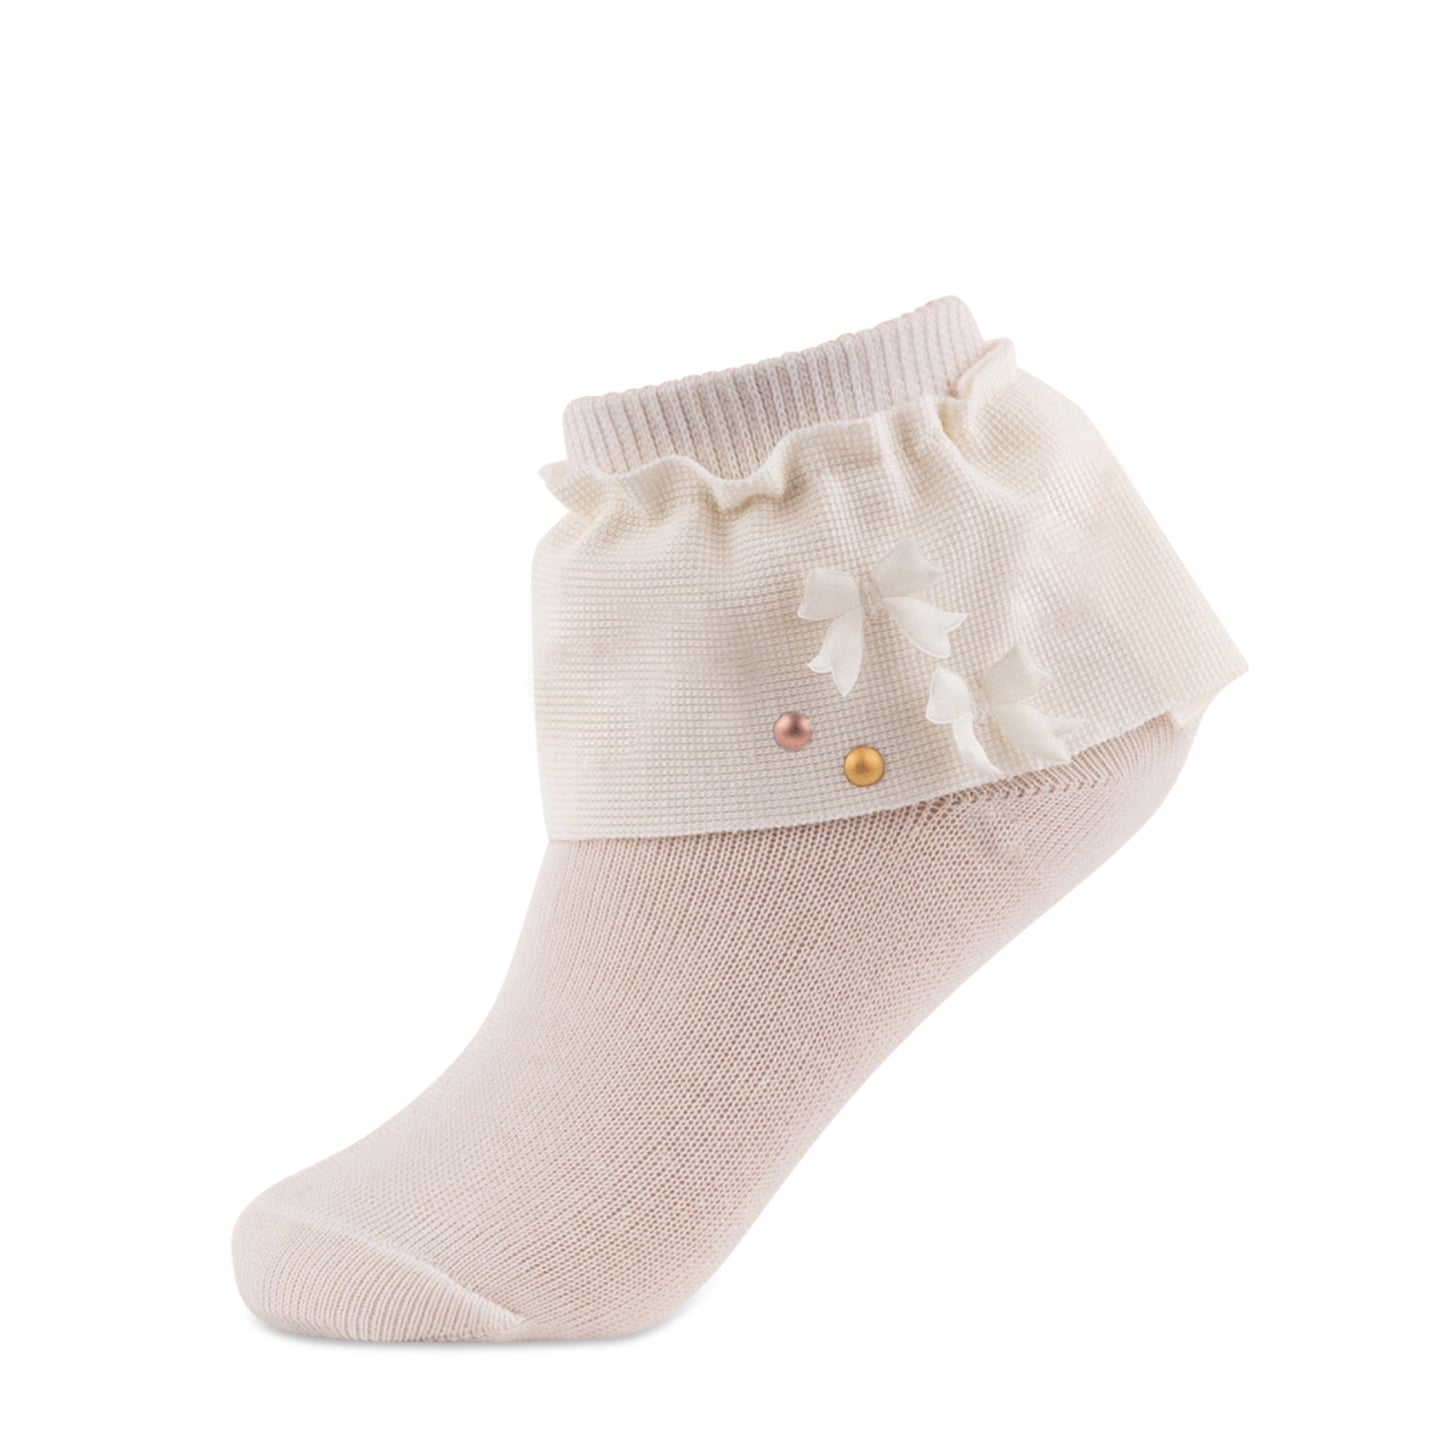 jrp socks cream dreamy lace anklet sock with bows